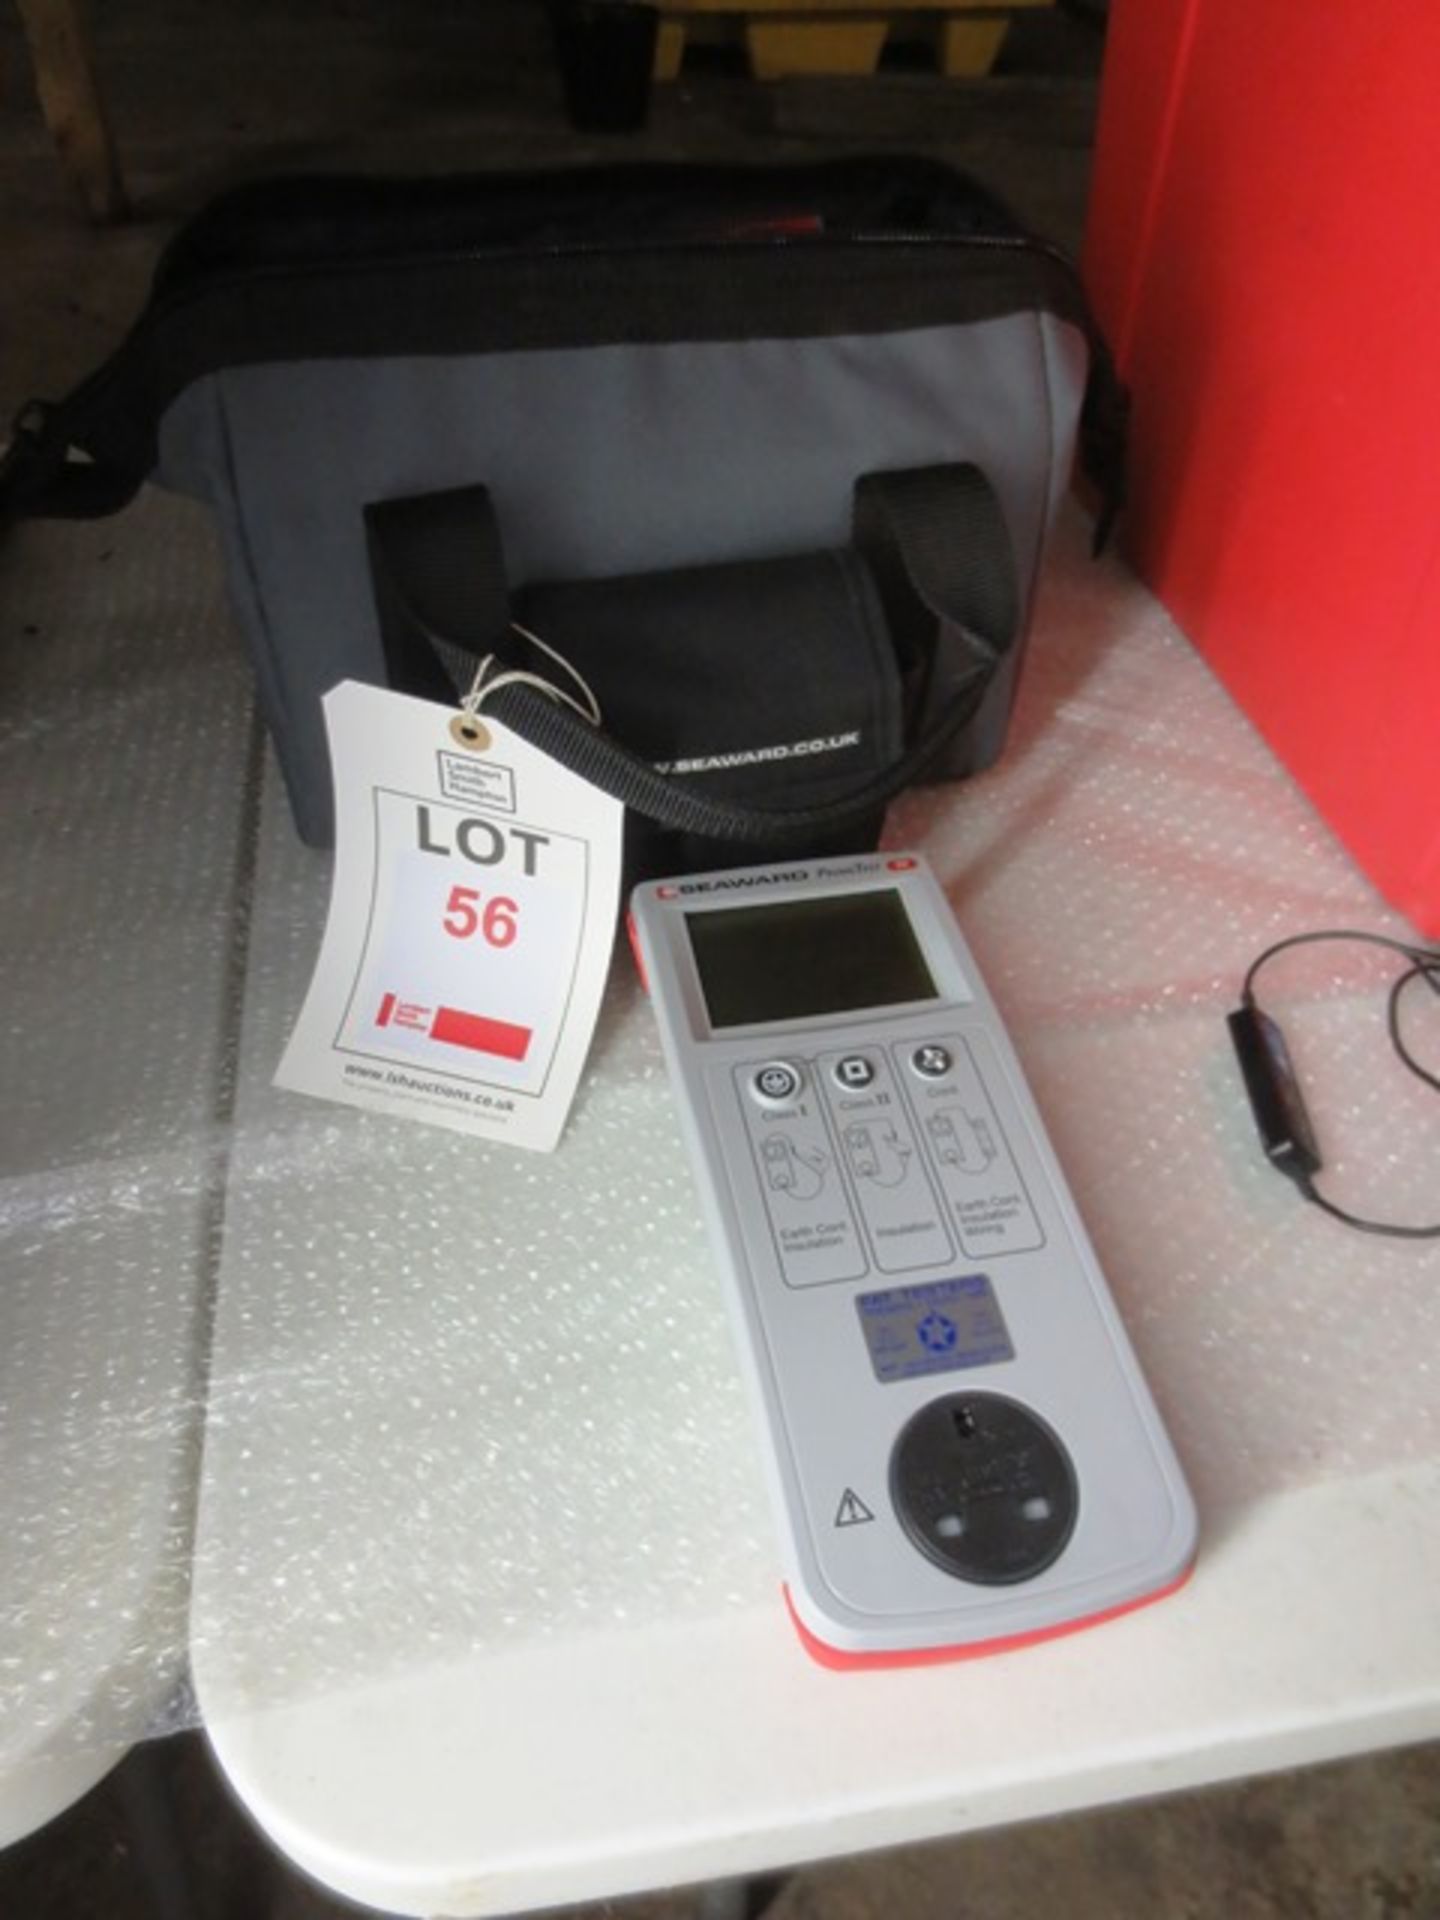 Seaward Prime Test 50 PAT tester, with carry case